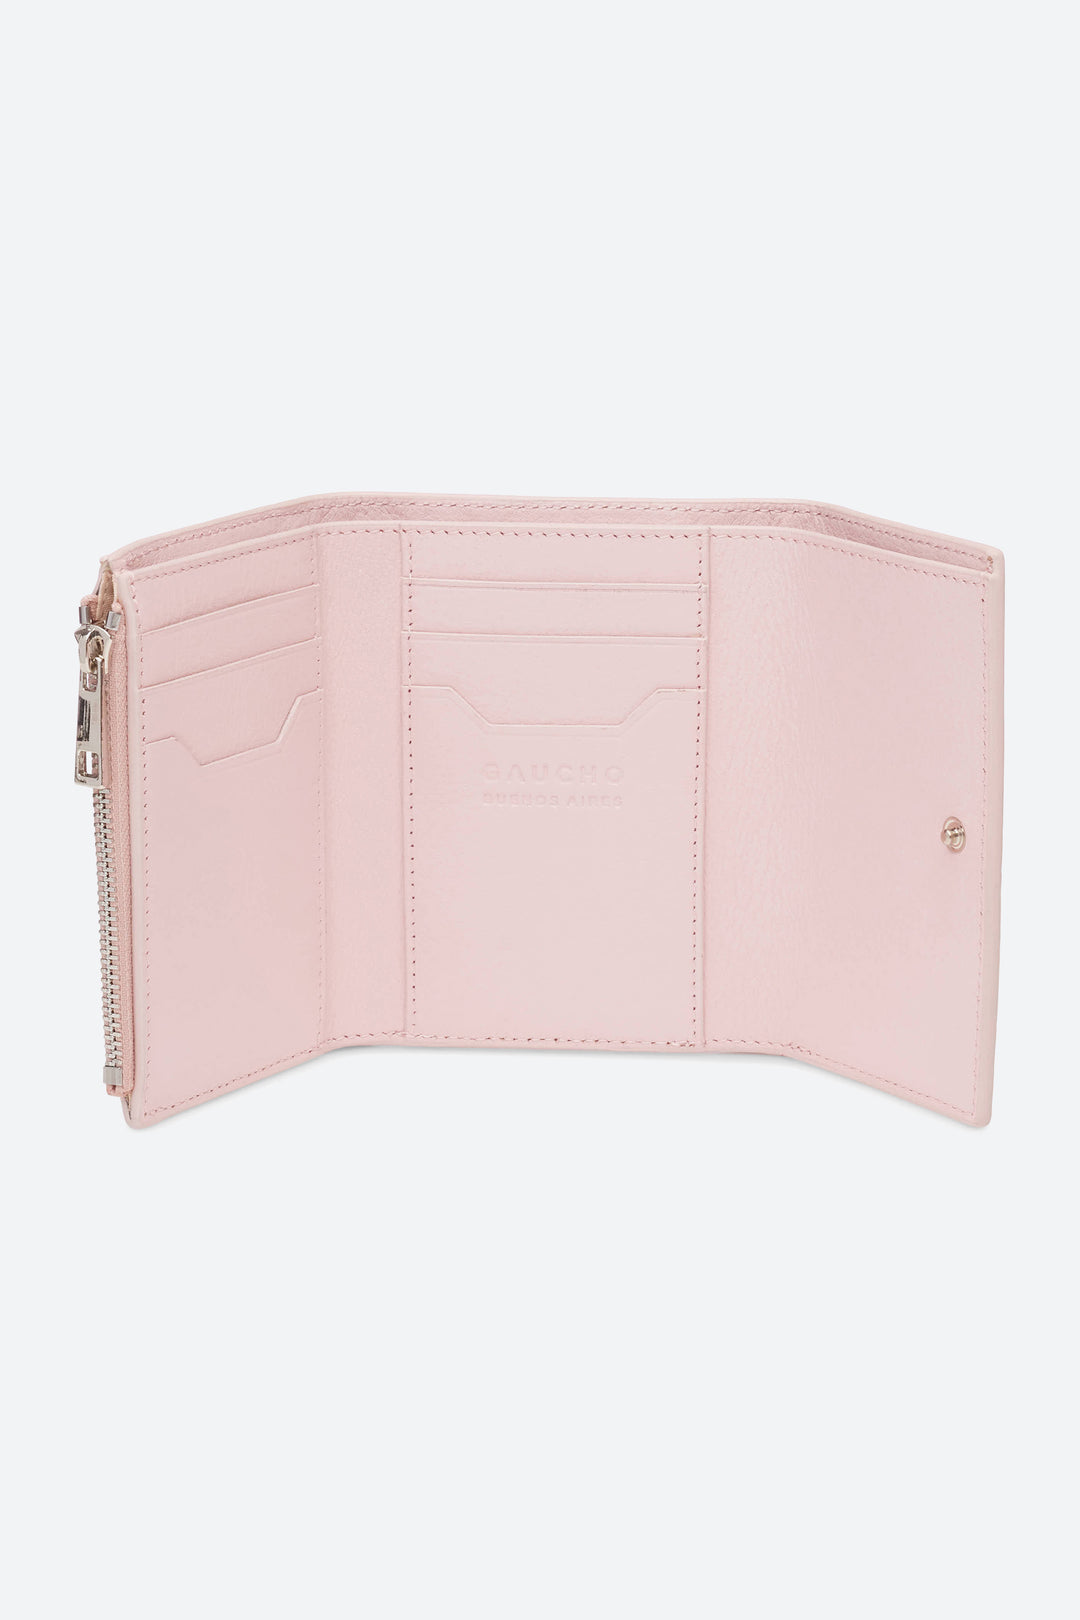 Tigre Tri-Fold Wallet in Peony Pink